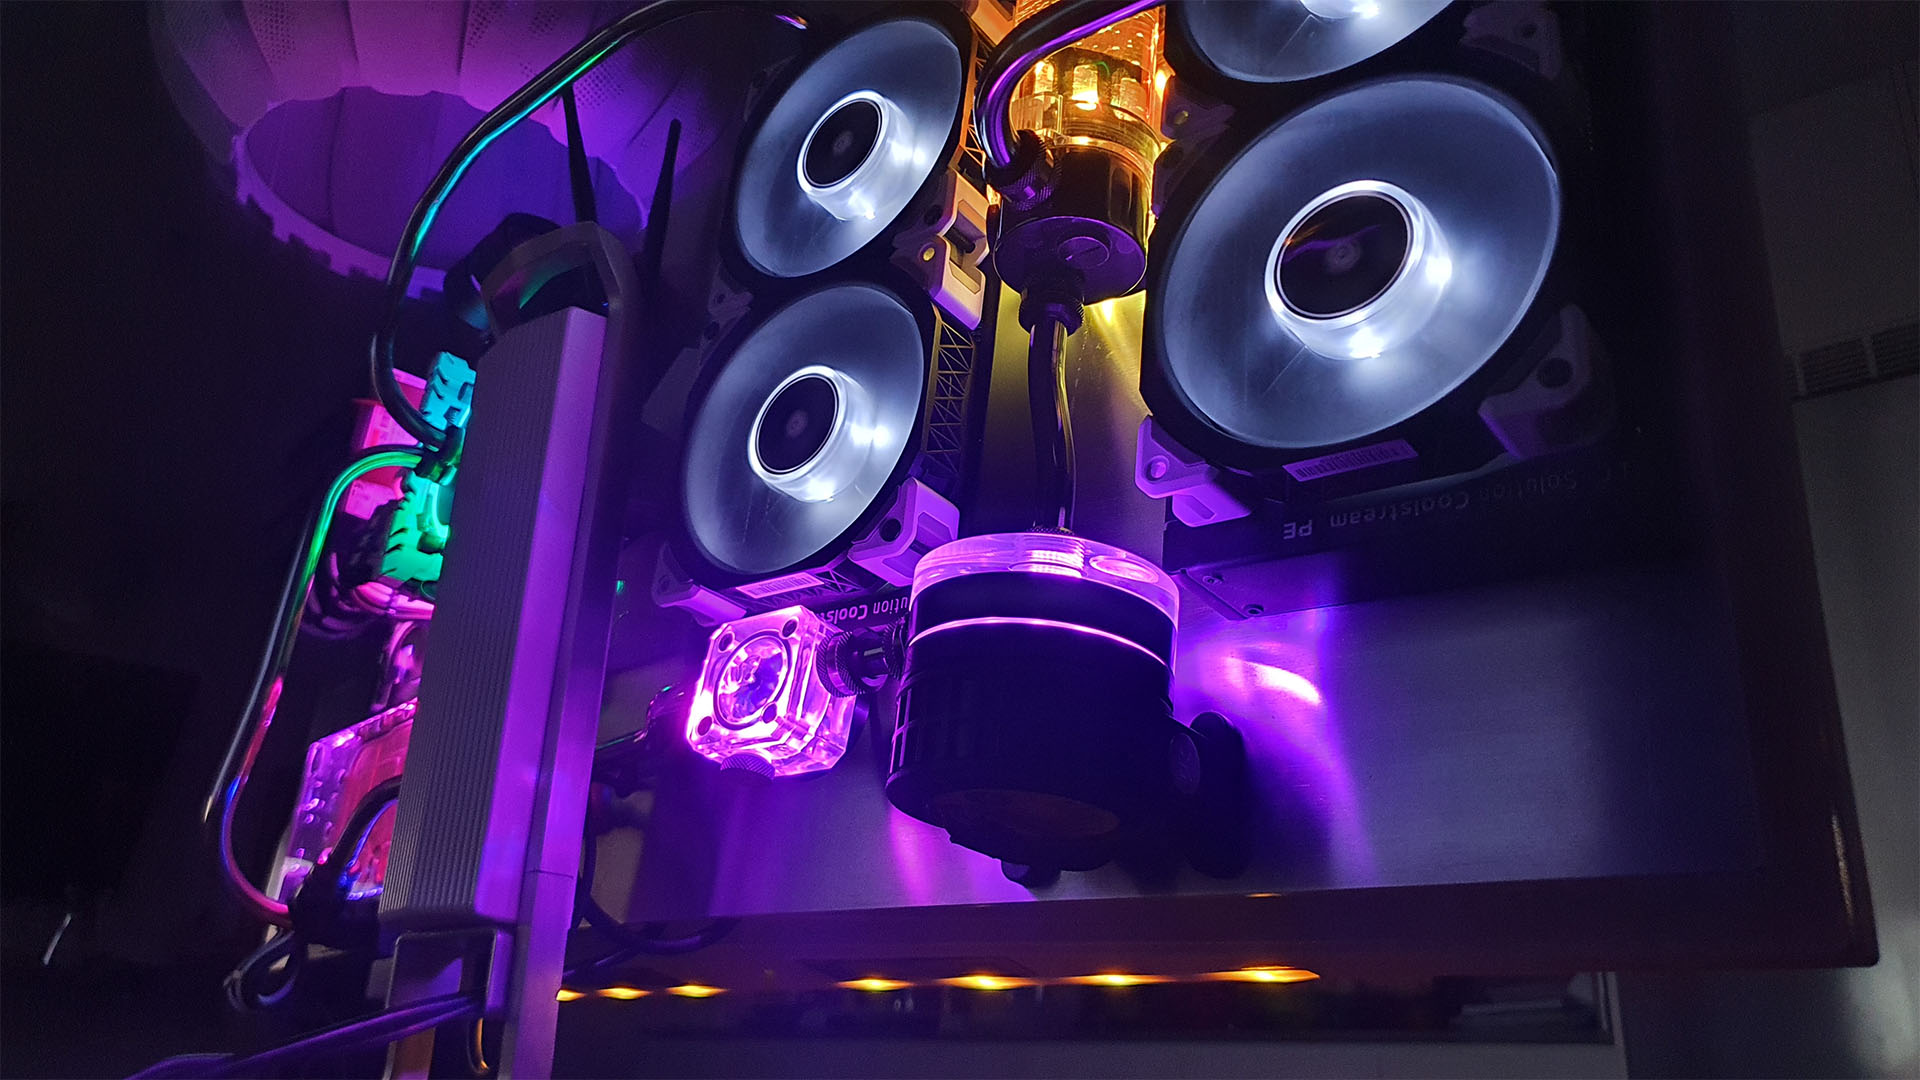 The cooling loop inside the all in one gaming pc